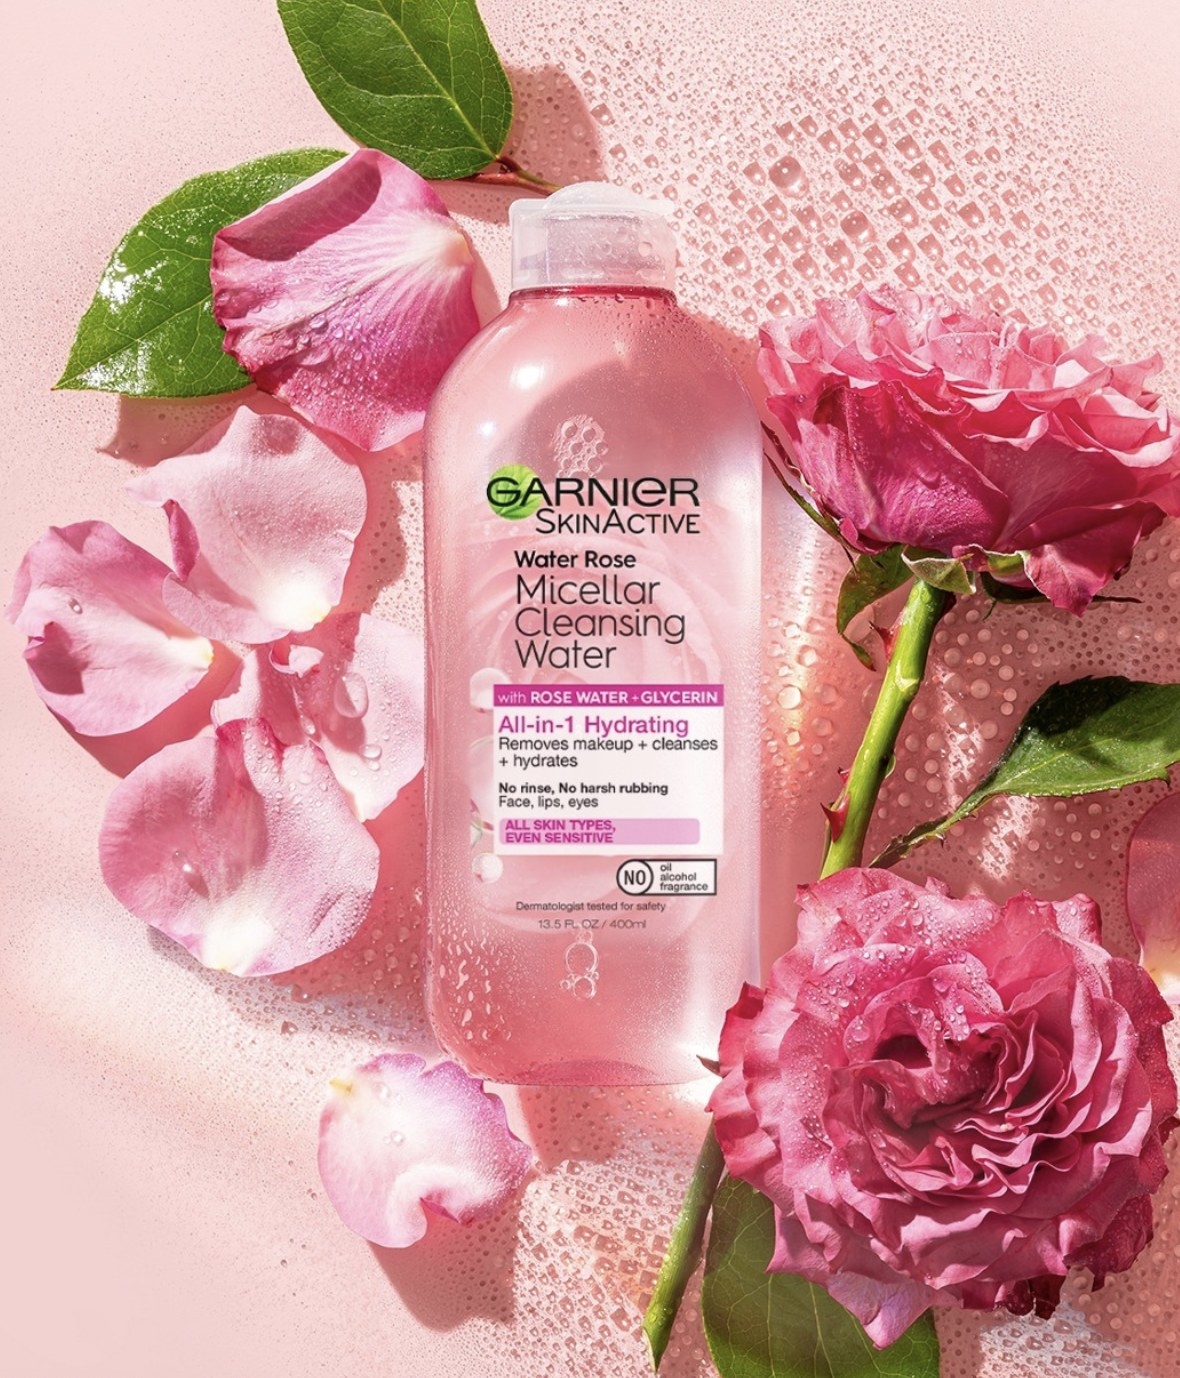 the micellar water next to pink roses and rose petals